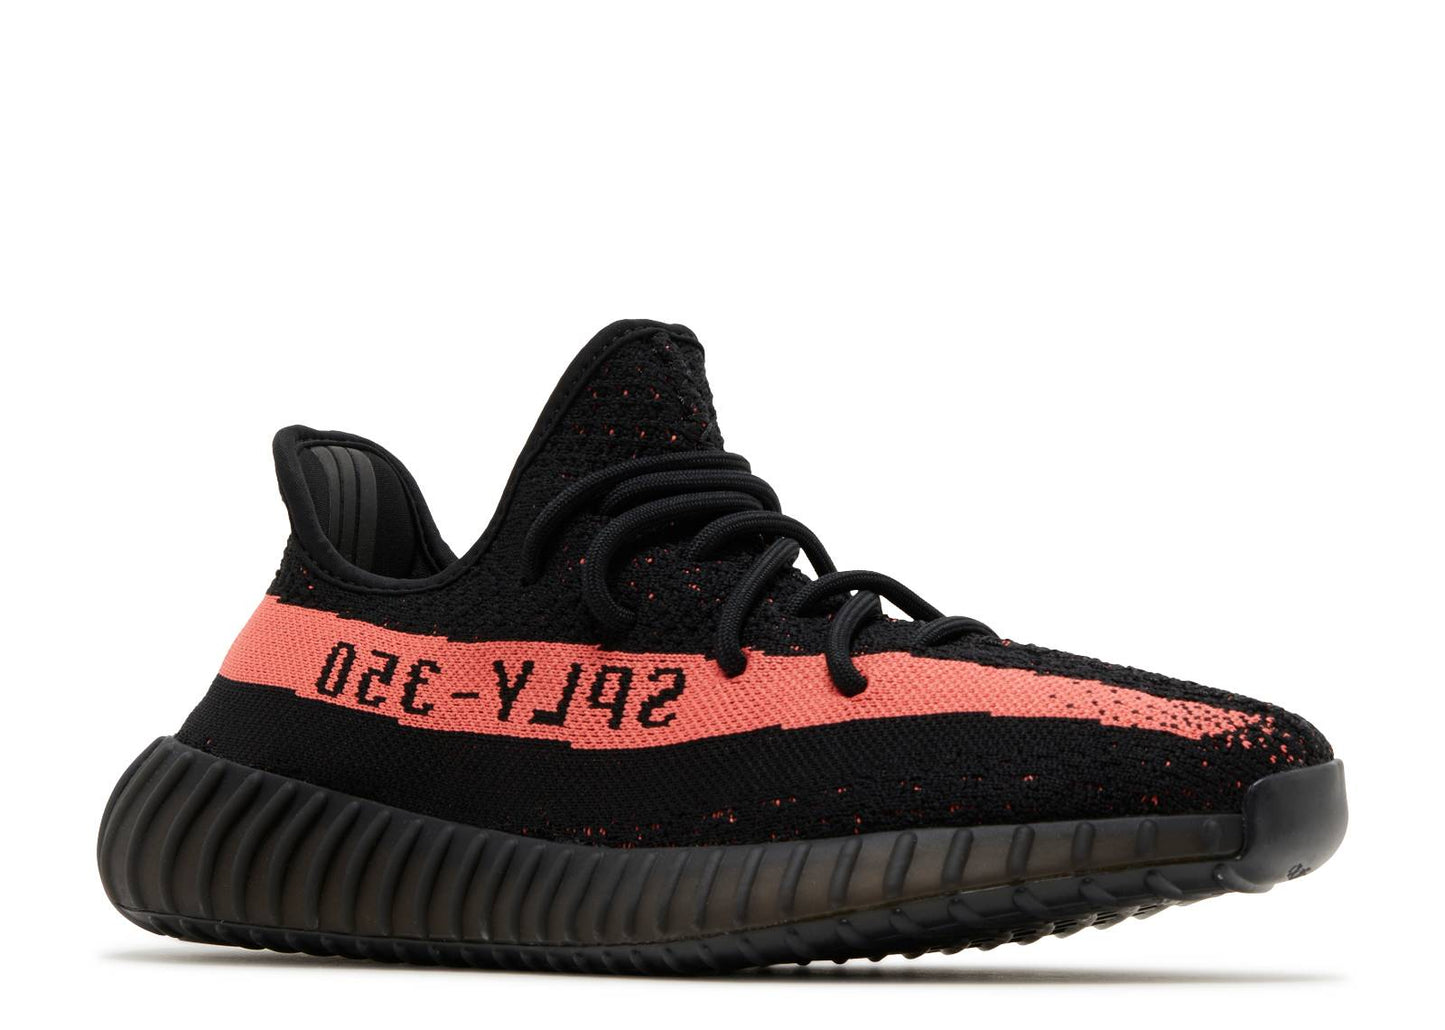 Adidas Yeezy Boost 350 V2 "Core Black/Red"